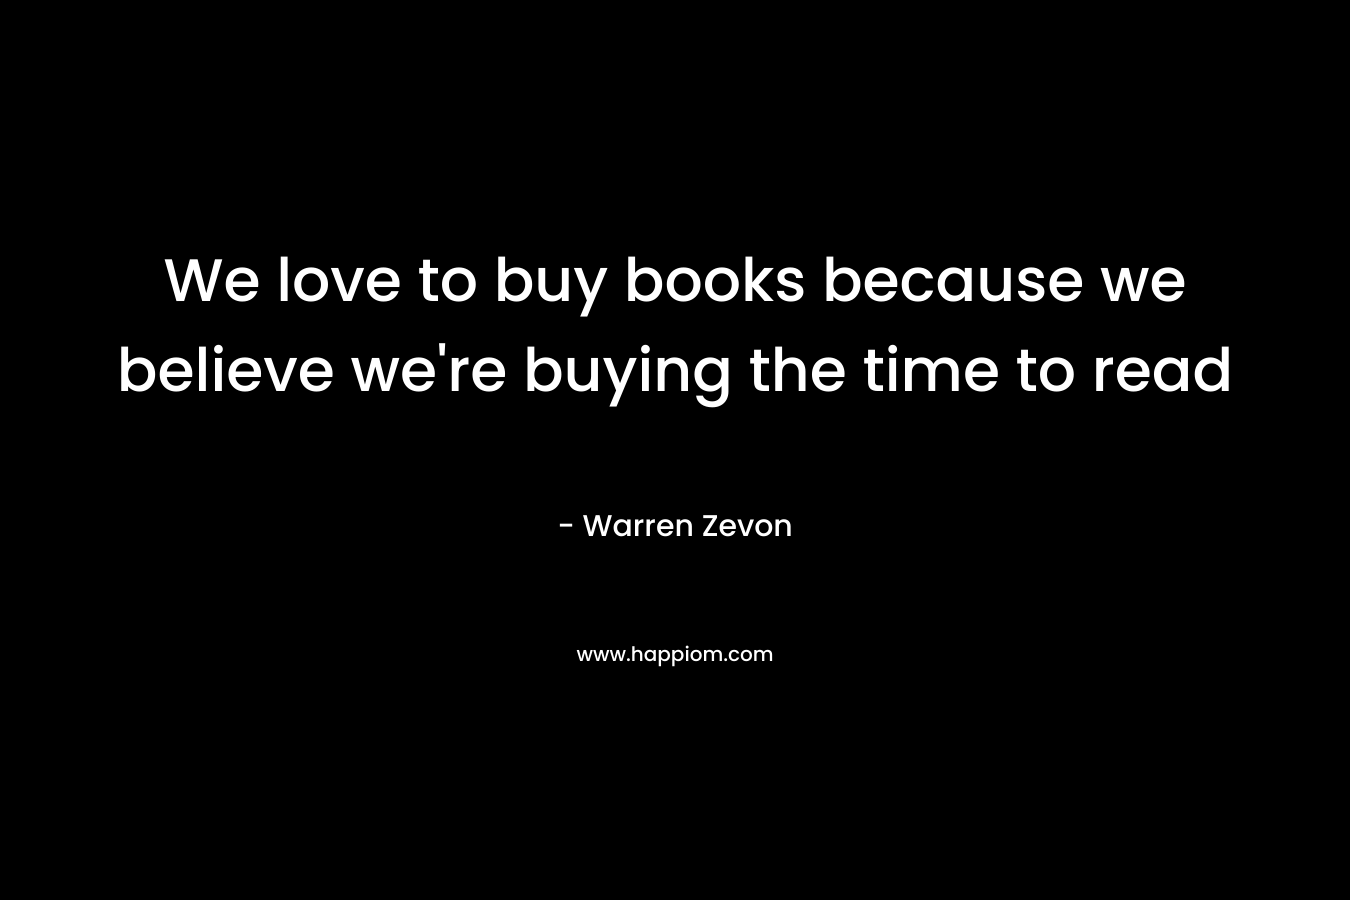 We love to buy books because we believe we're buying the time to read